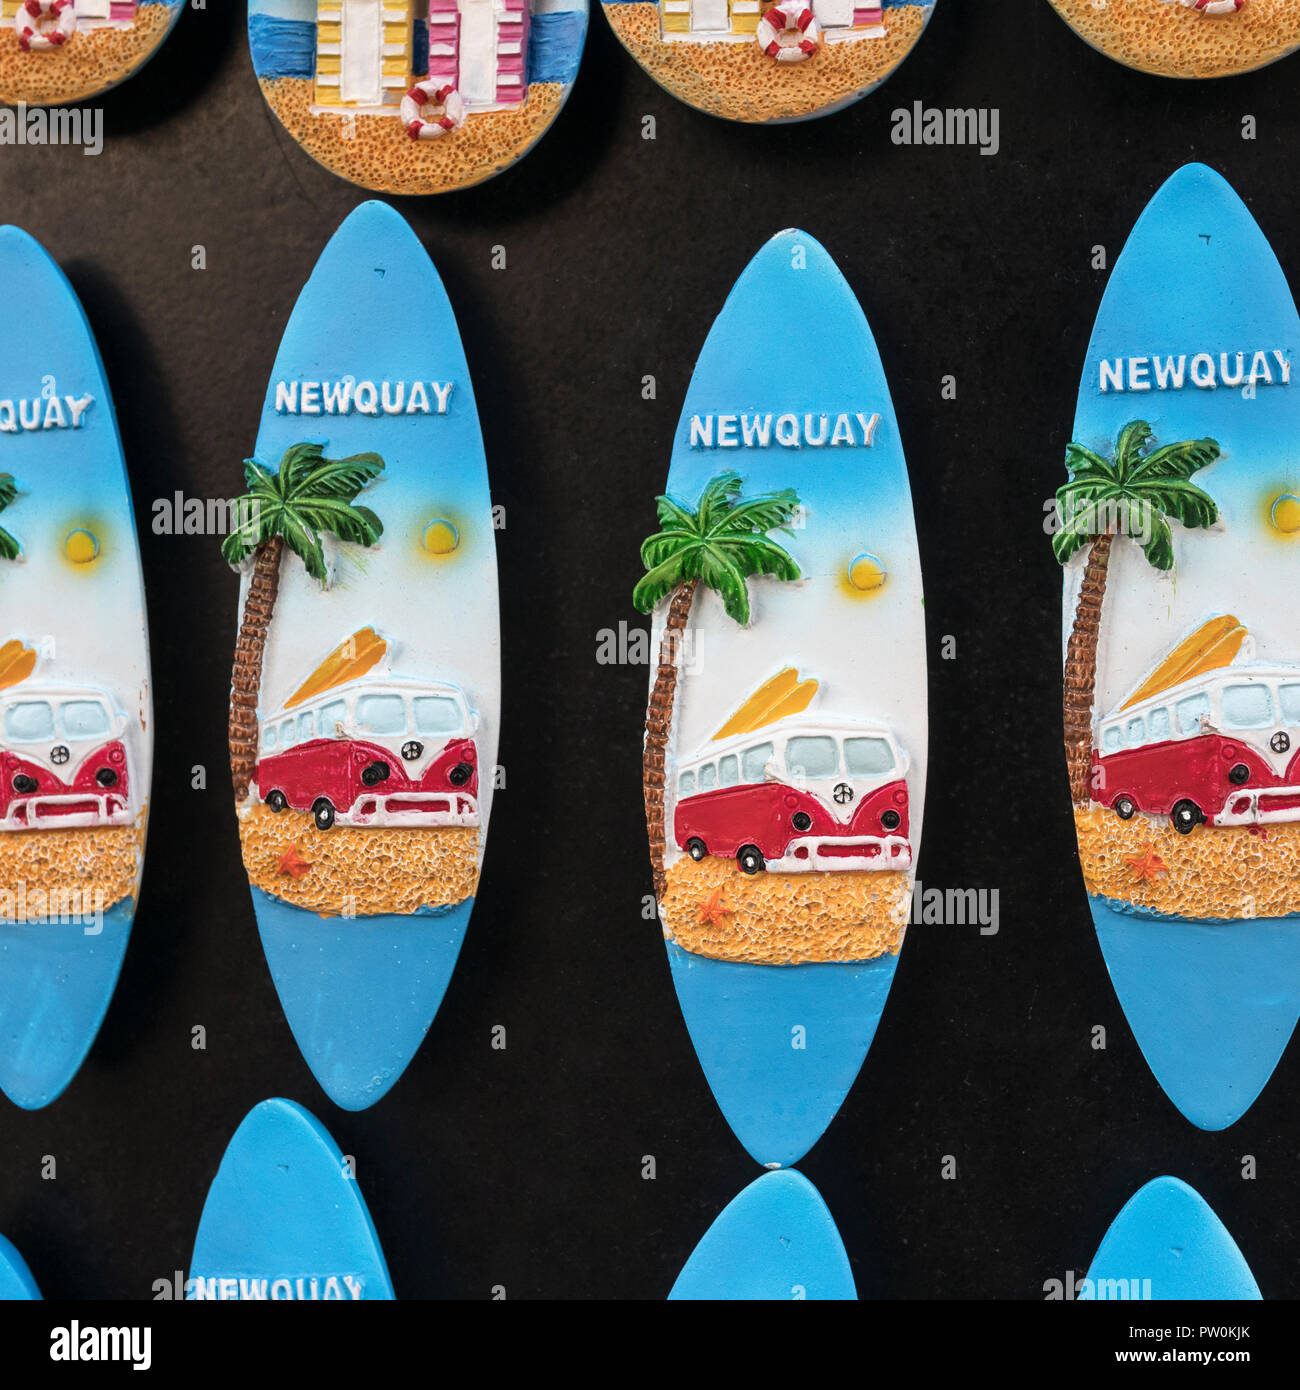 Small surfboard fridge magnet souvenirs on sale at a Newquay souvenir shop - home of Boardmasters Festival. Stock Photo